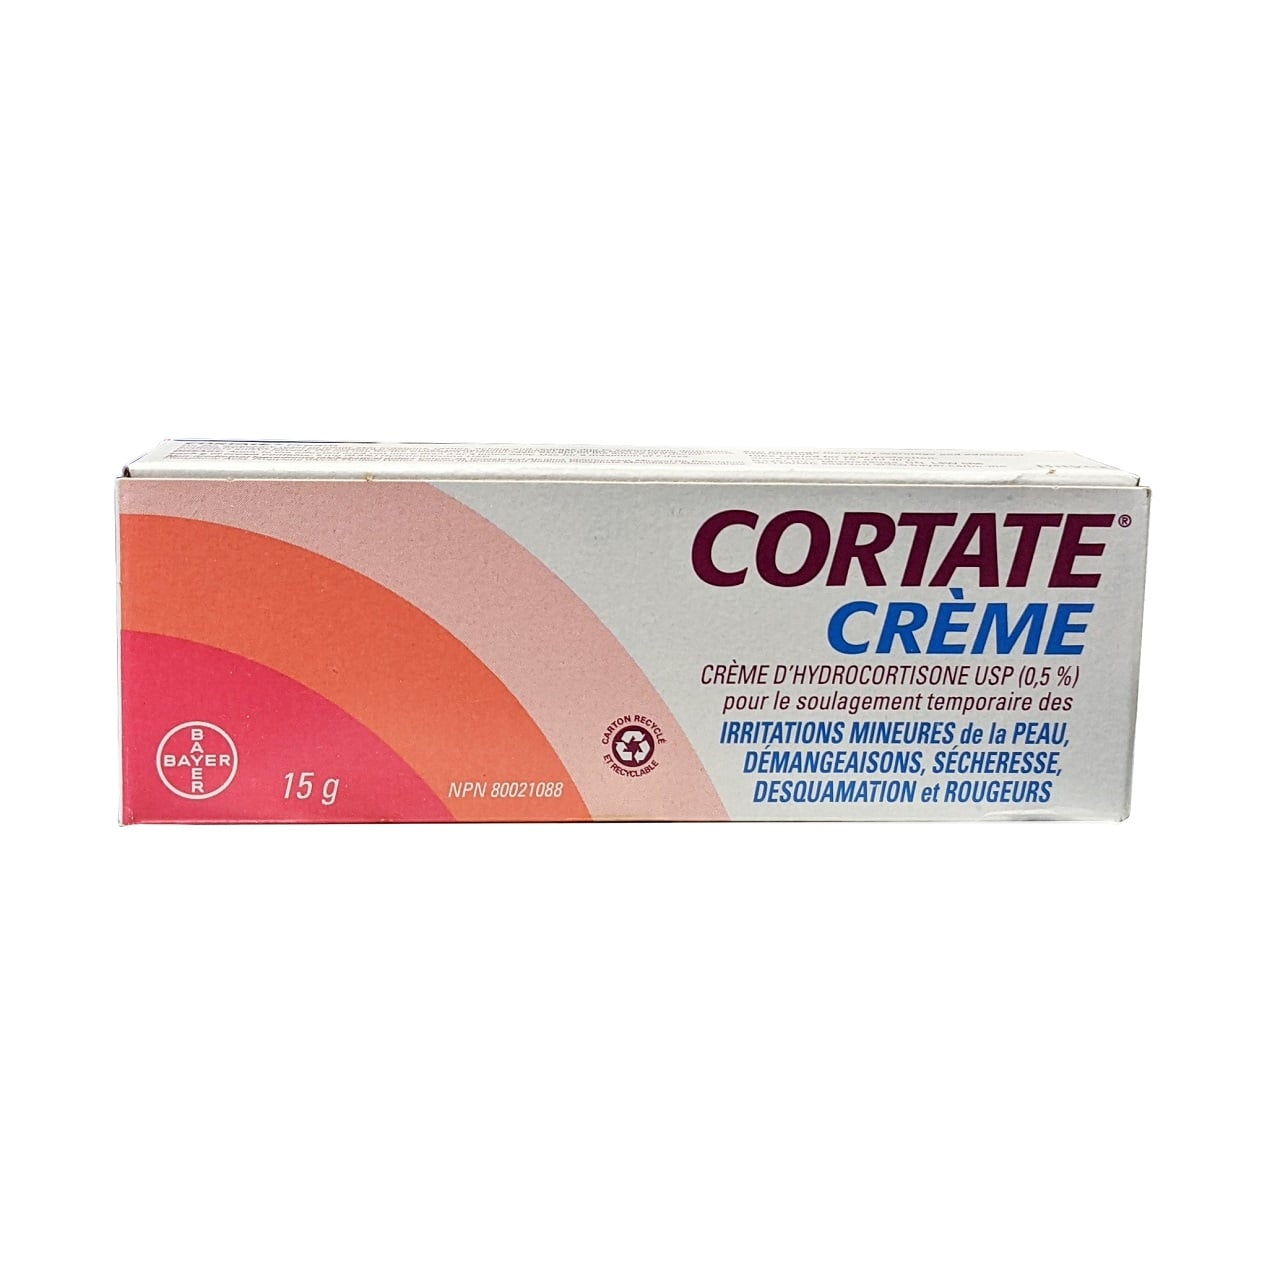 Product label for Cortate Hydrocortisone Cream USP 0.5% (15 grams) in French